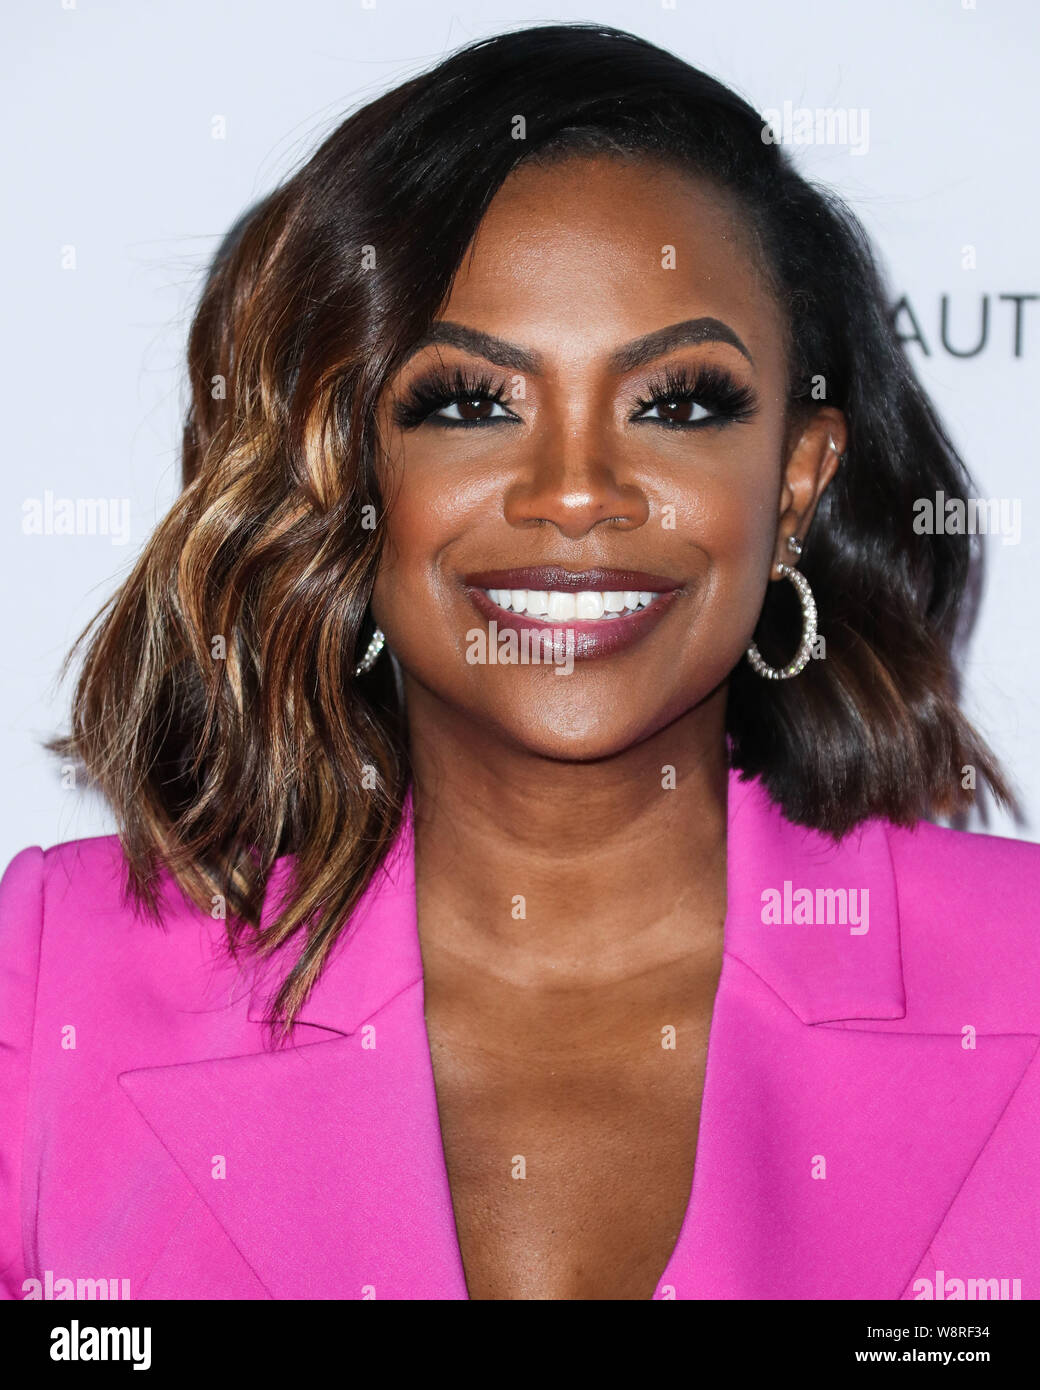 Los Angeles, United States. 10th Aug, 2019. LOS ANGELES, CALIFORNIA, USA - AUGUST 10: Television Personality Kandi Burruss arrives at the Beautycon Festival Los Angeles 2019 - Day 1 held at the Los Angeles Convention Center on August 10, 2019 in Los Angeles, California, United States. (Photo by Xavier Collin/Image Press Agency) Credit: Image Press Agency/Alamy Live News Stock Photo